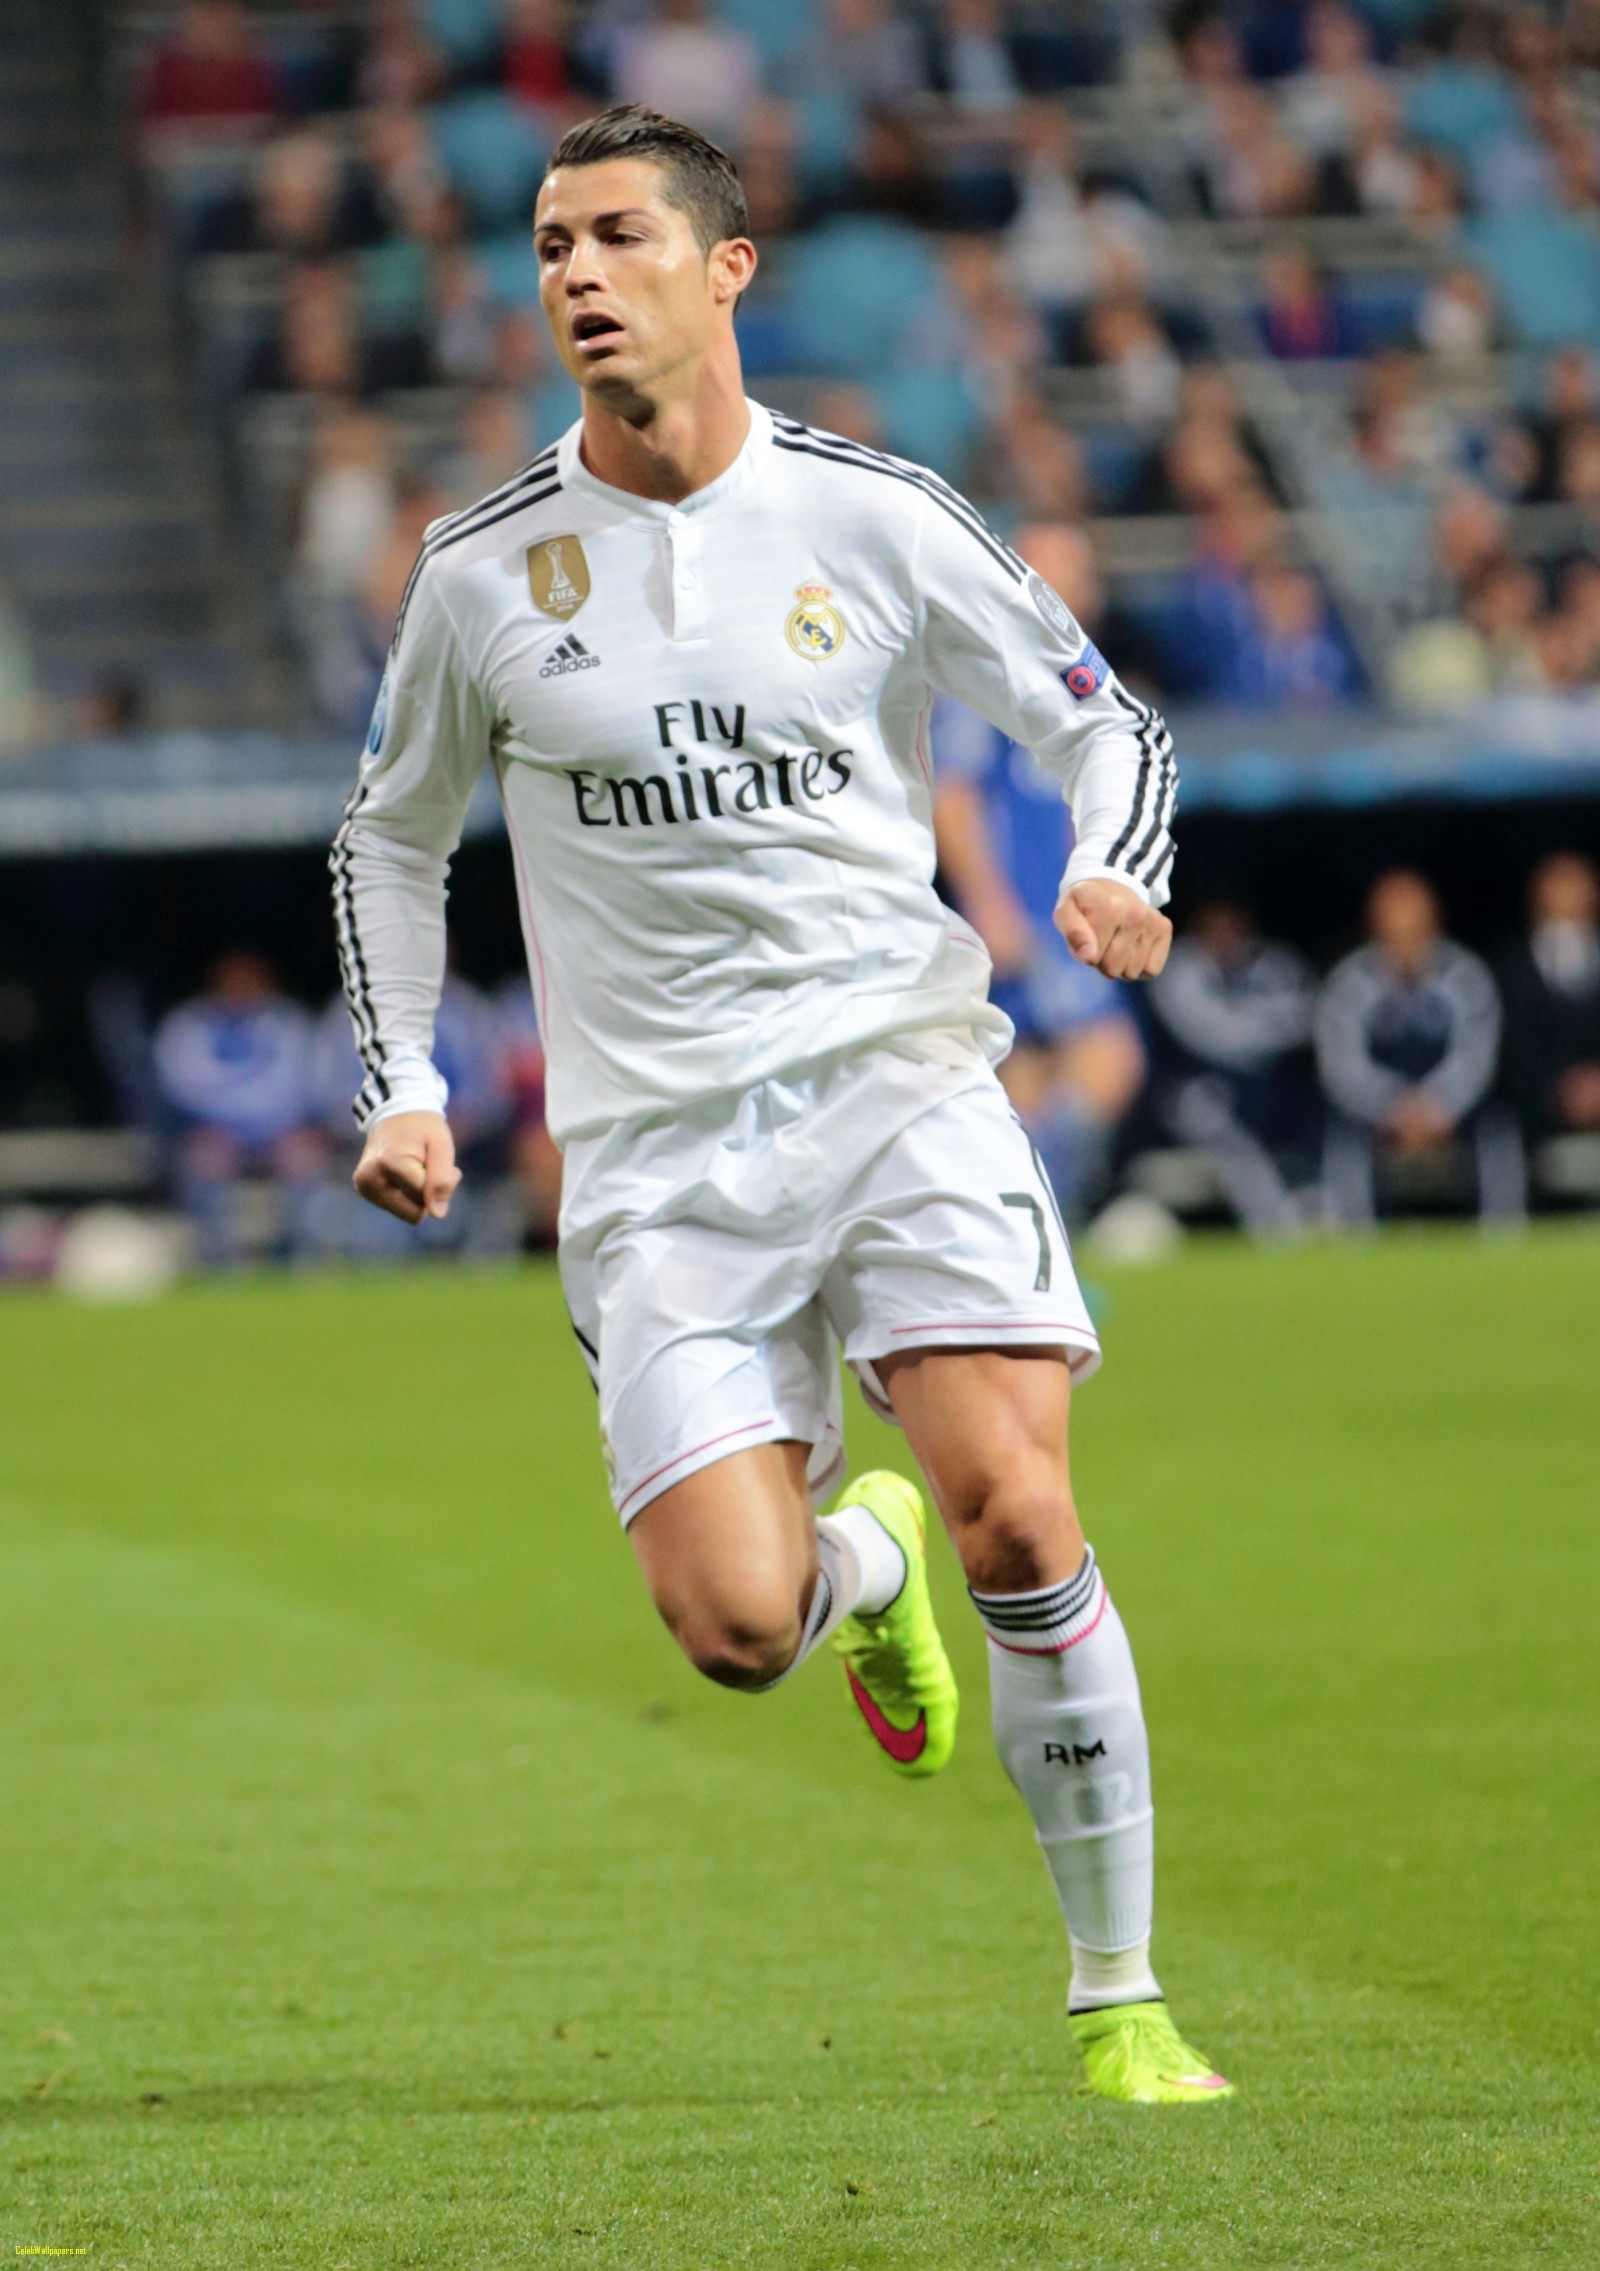 Cristiano Ronaldo Wallpapers Hd 75 Pictures